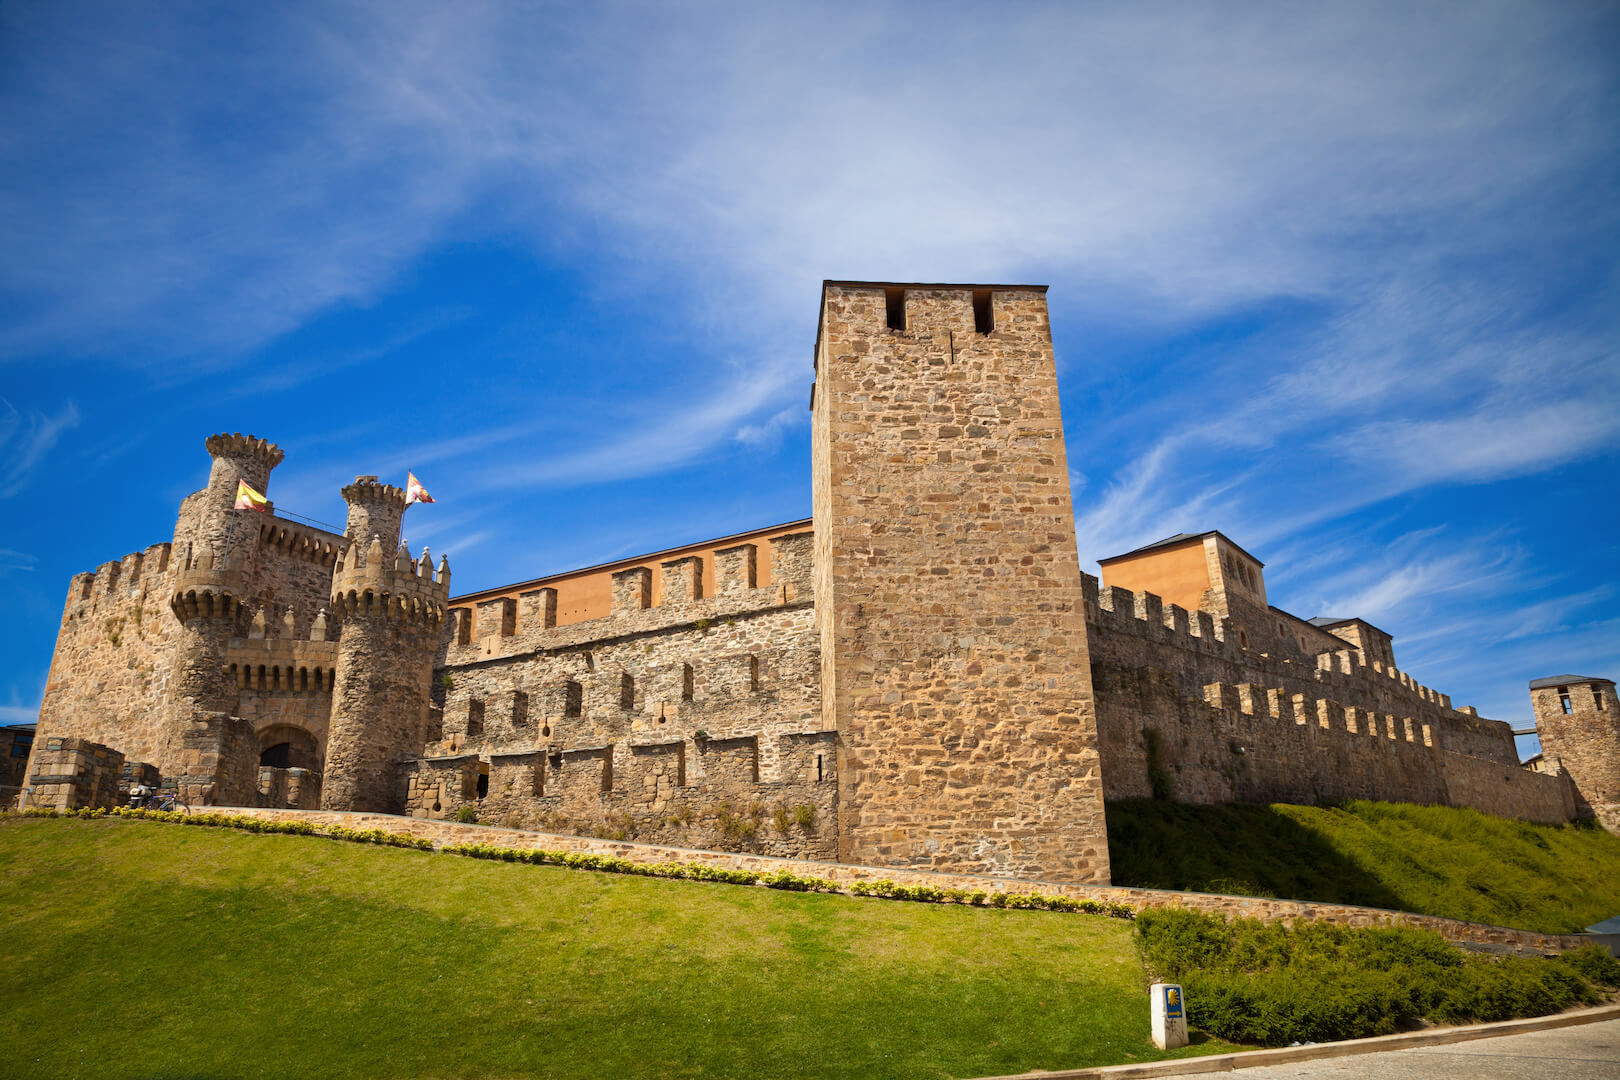 Ponferrada's Knights Templar Castle is your starting point